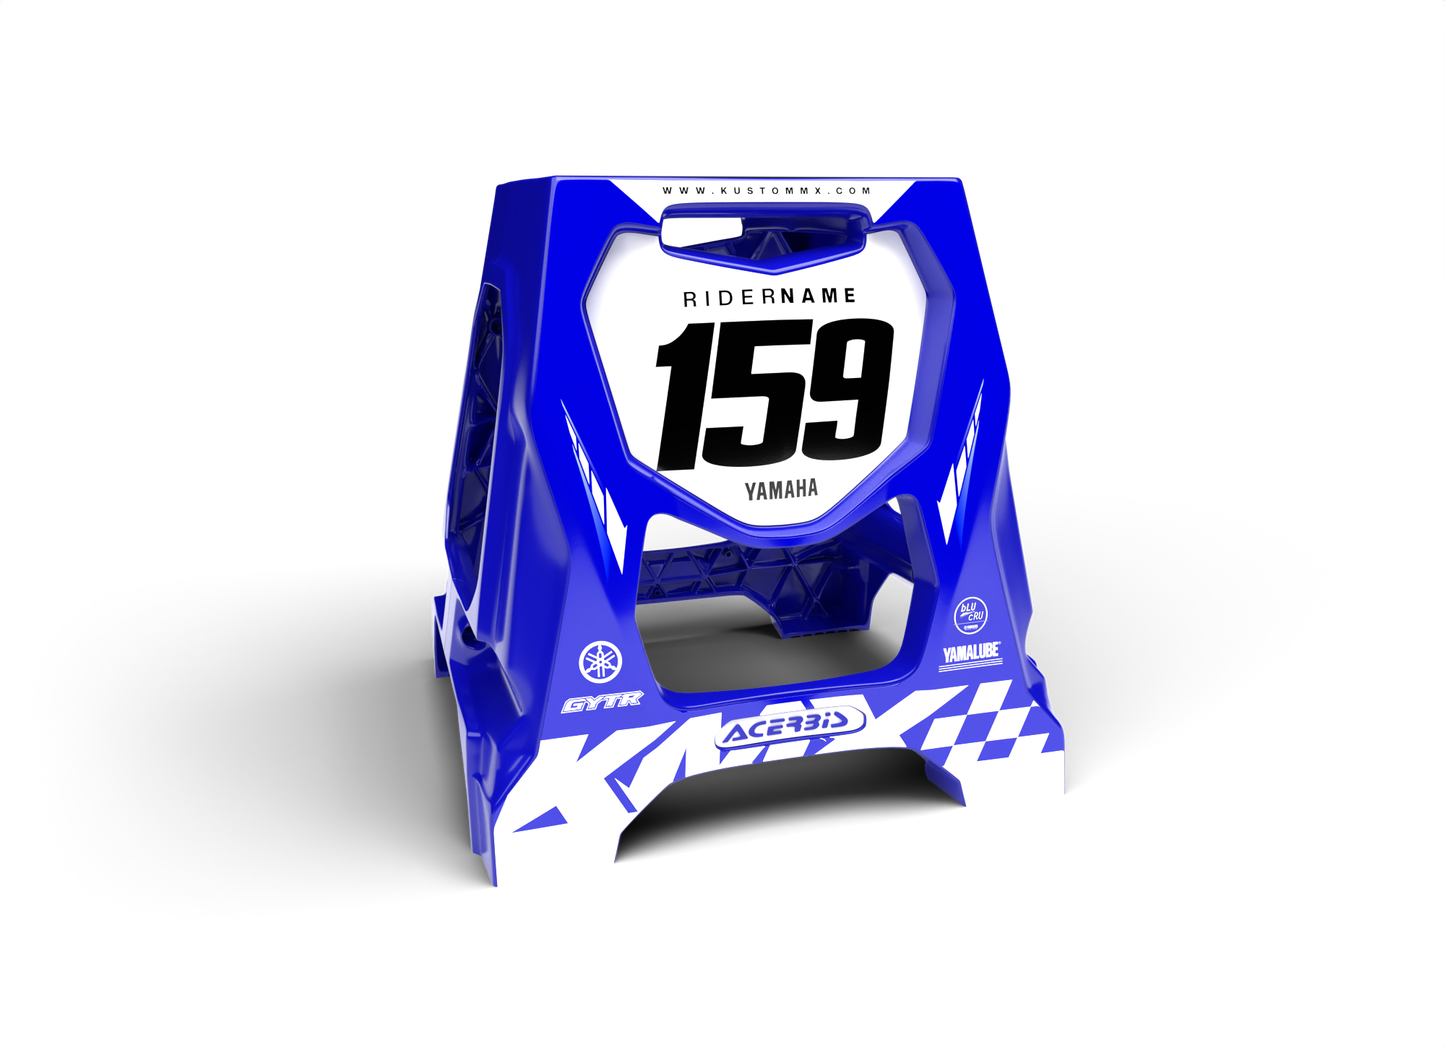 Racer Acerbis 711 Stand Decal